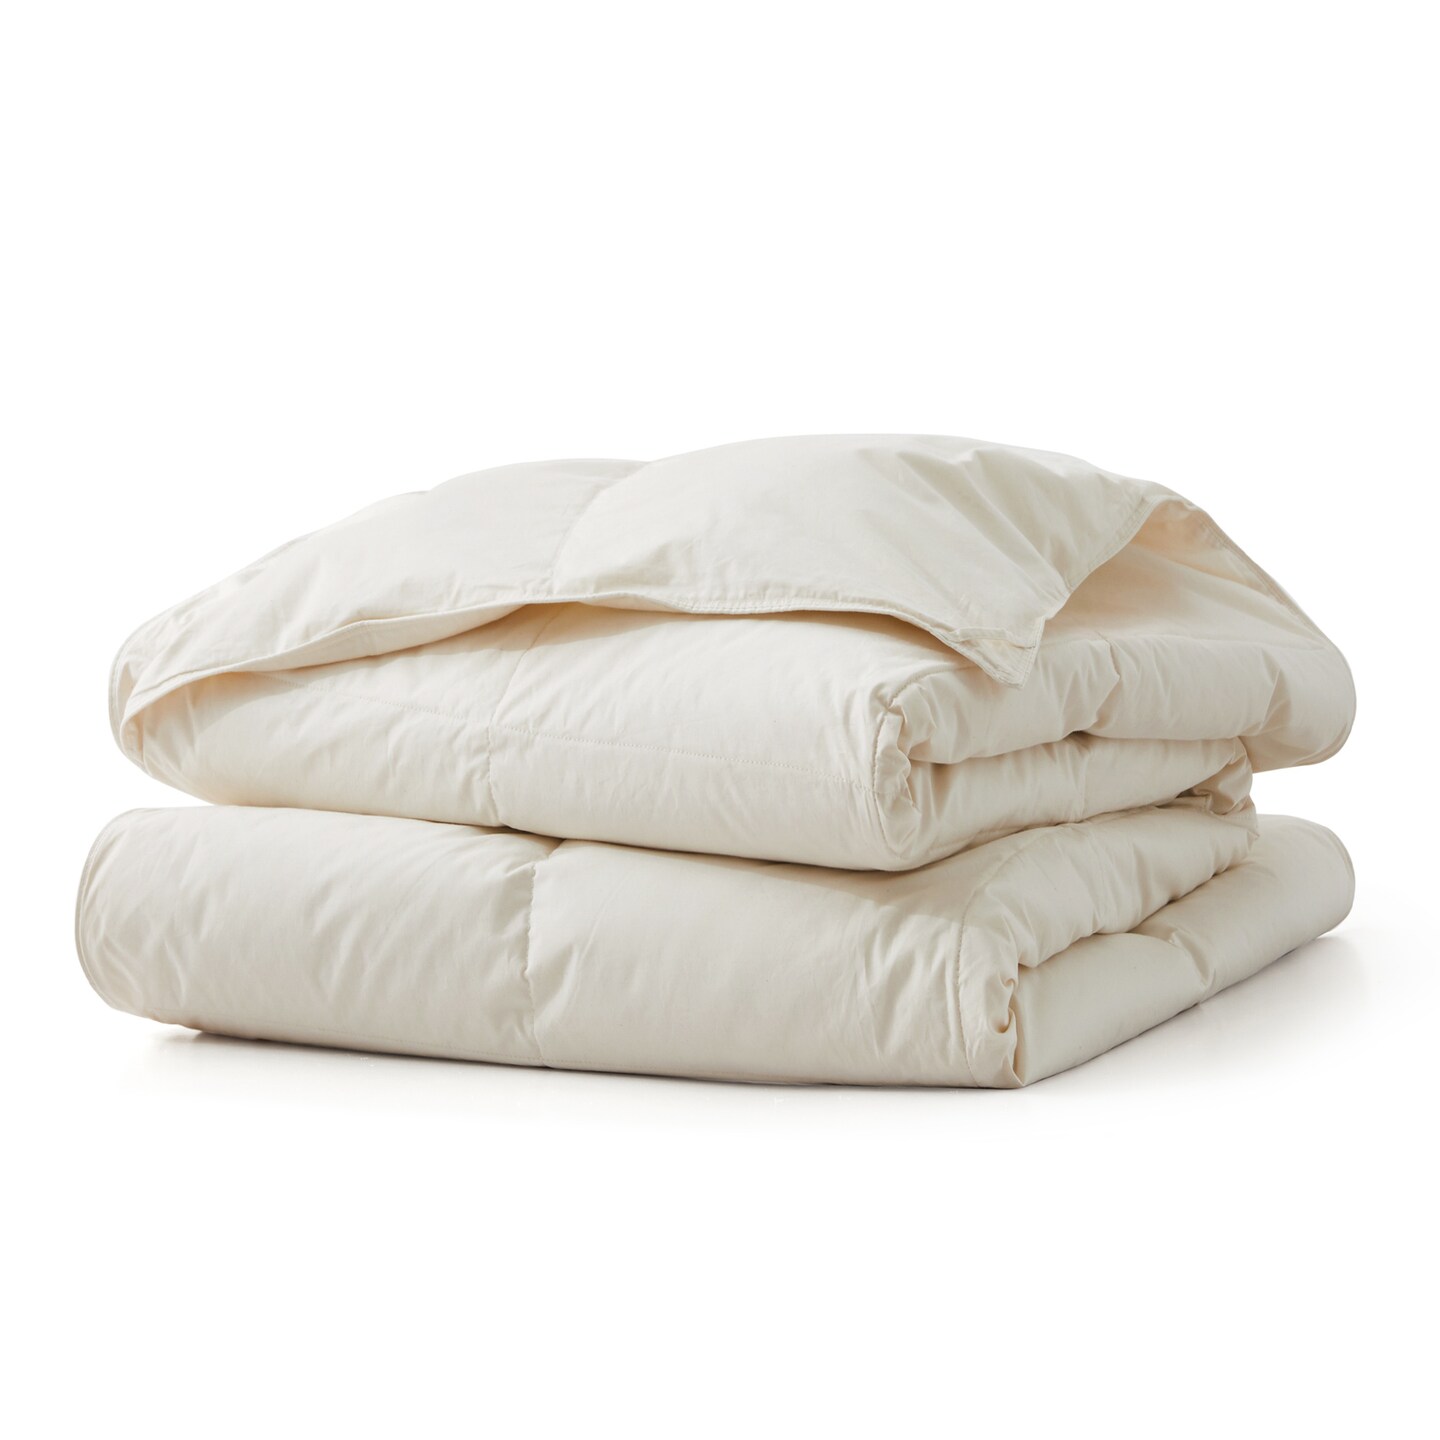 Peace Nest Premium Lightweight Organic Cotton Comforter with Down and Feather Fiber Fill - Perfect for Summer